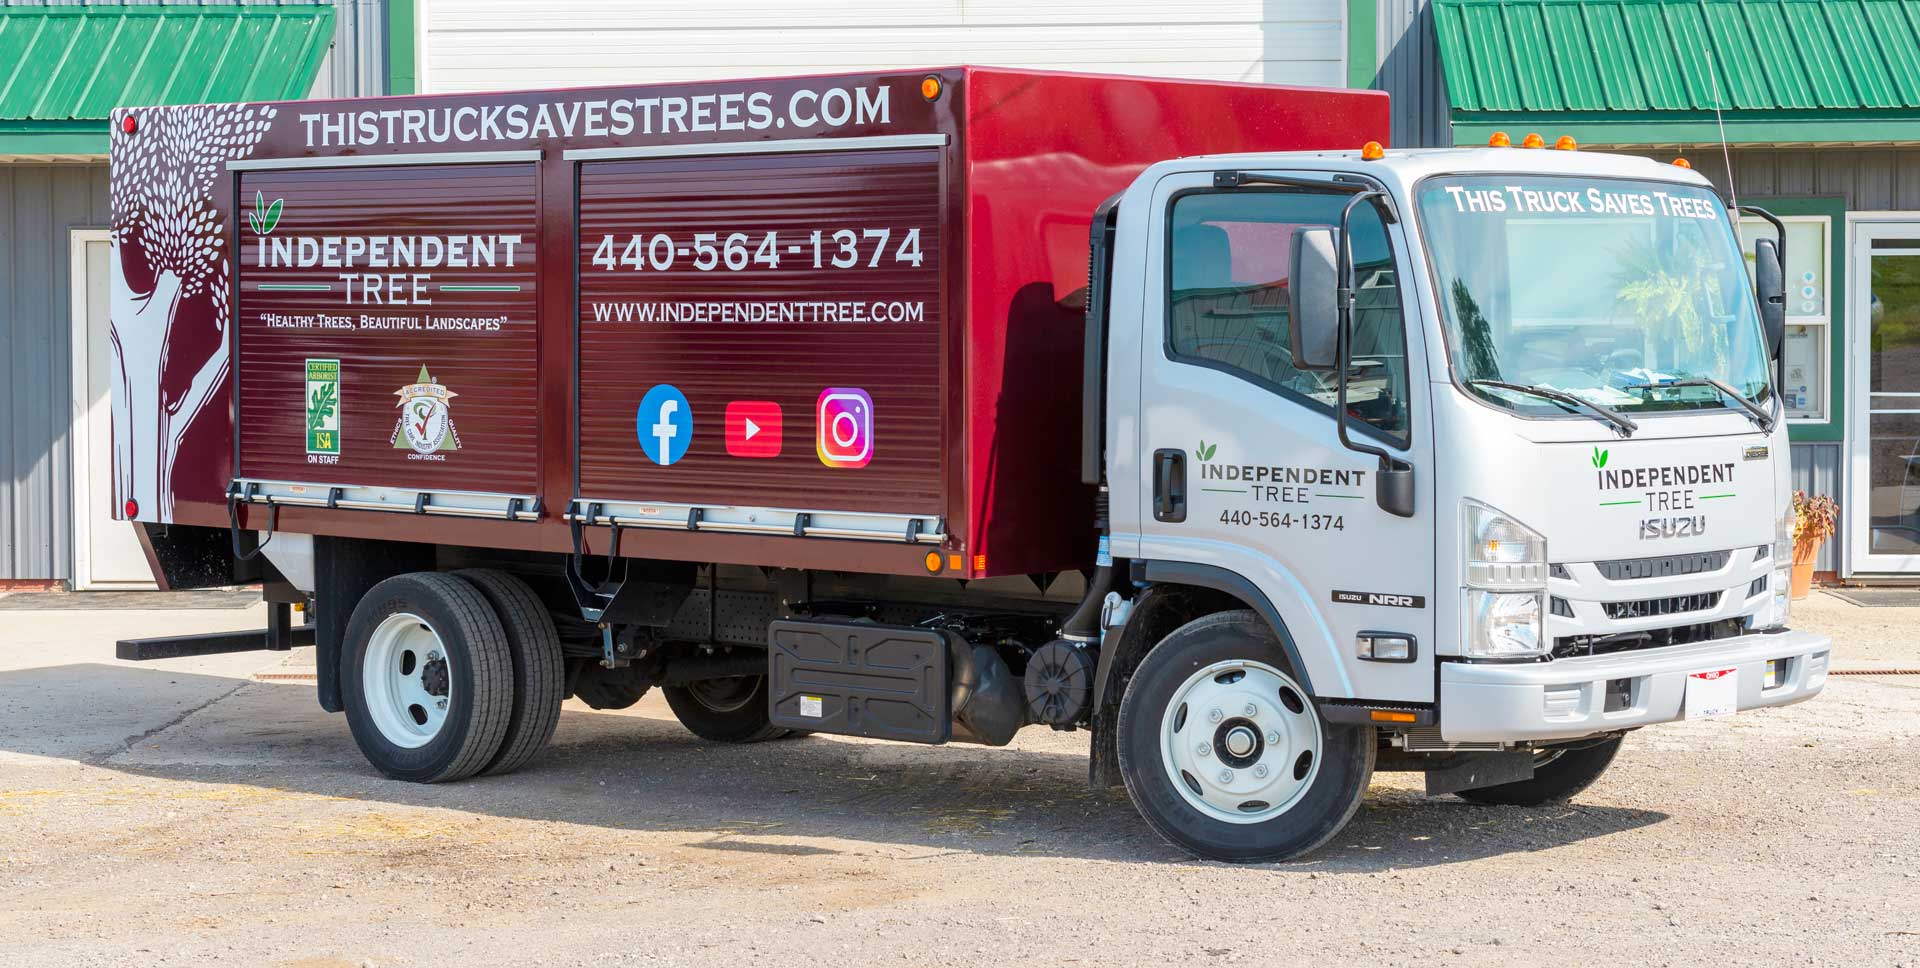 red truck with "this truck saves trees" and Independent Tree logo